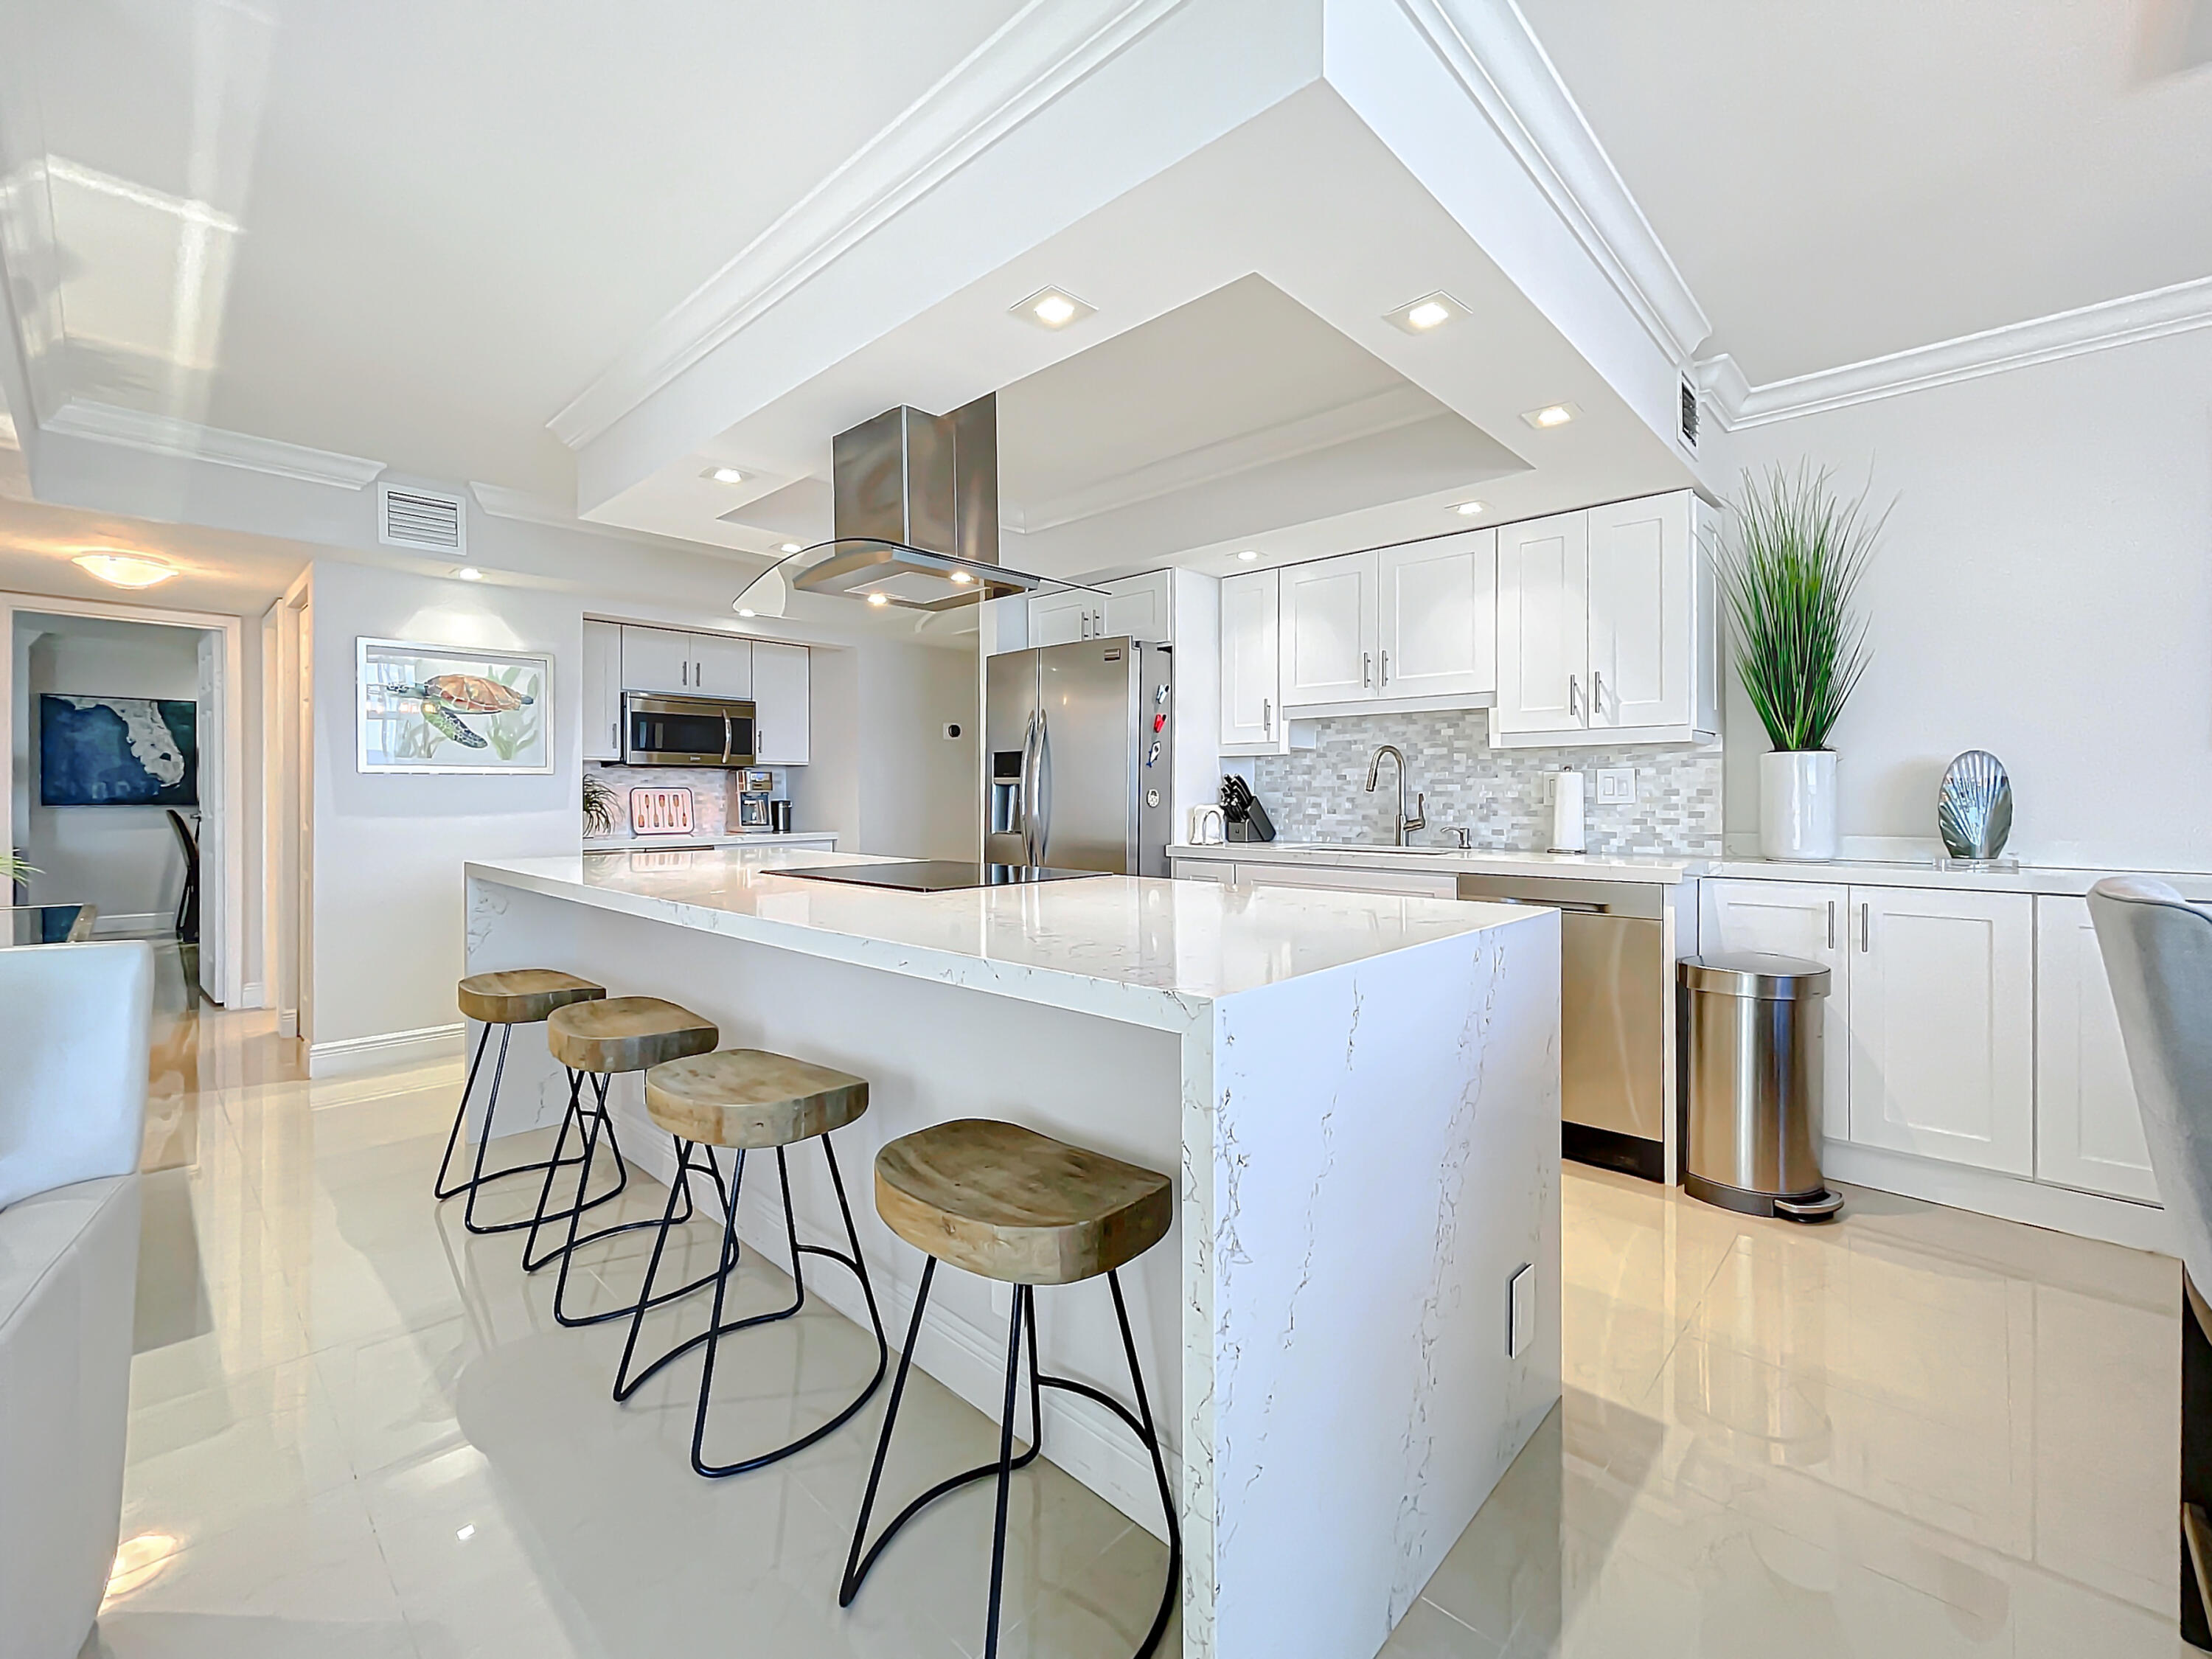 a kitchen with stainless steel appliances kitchen island a table chairs sink and cabinets